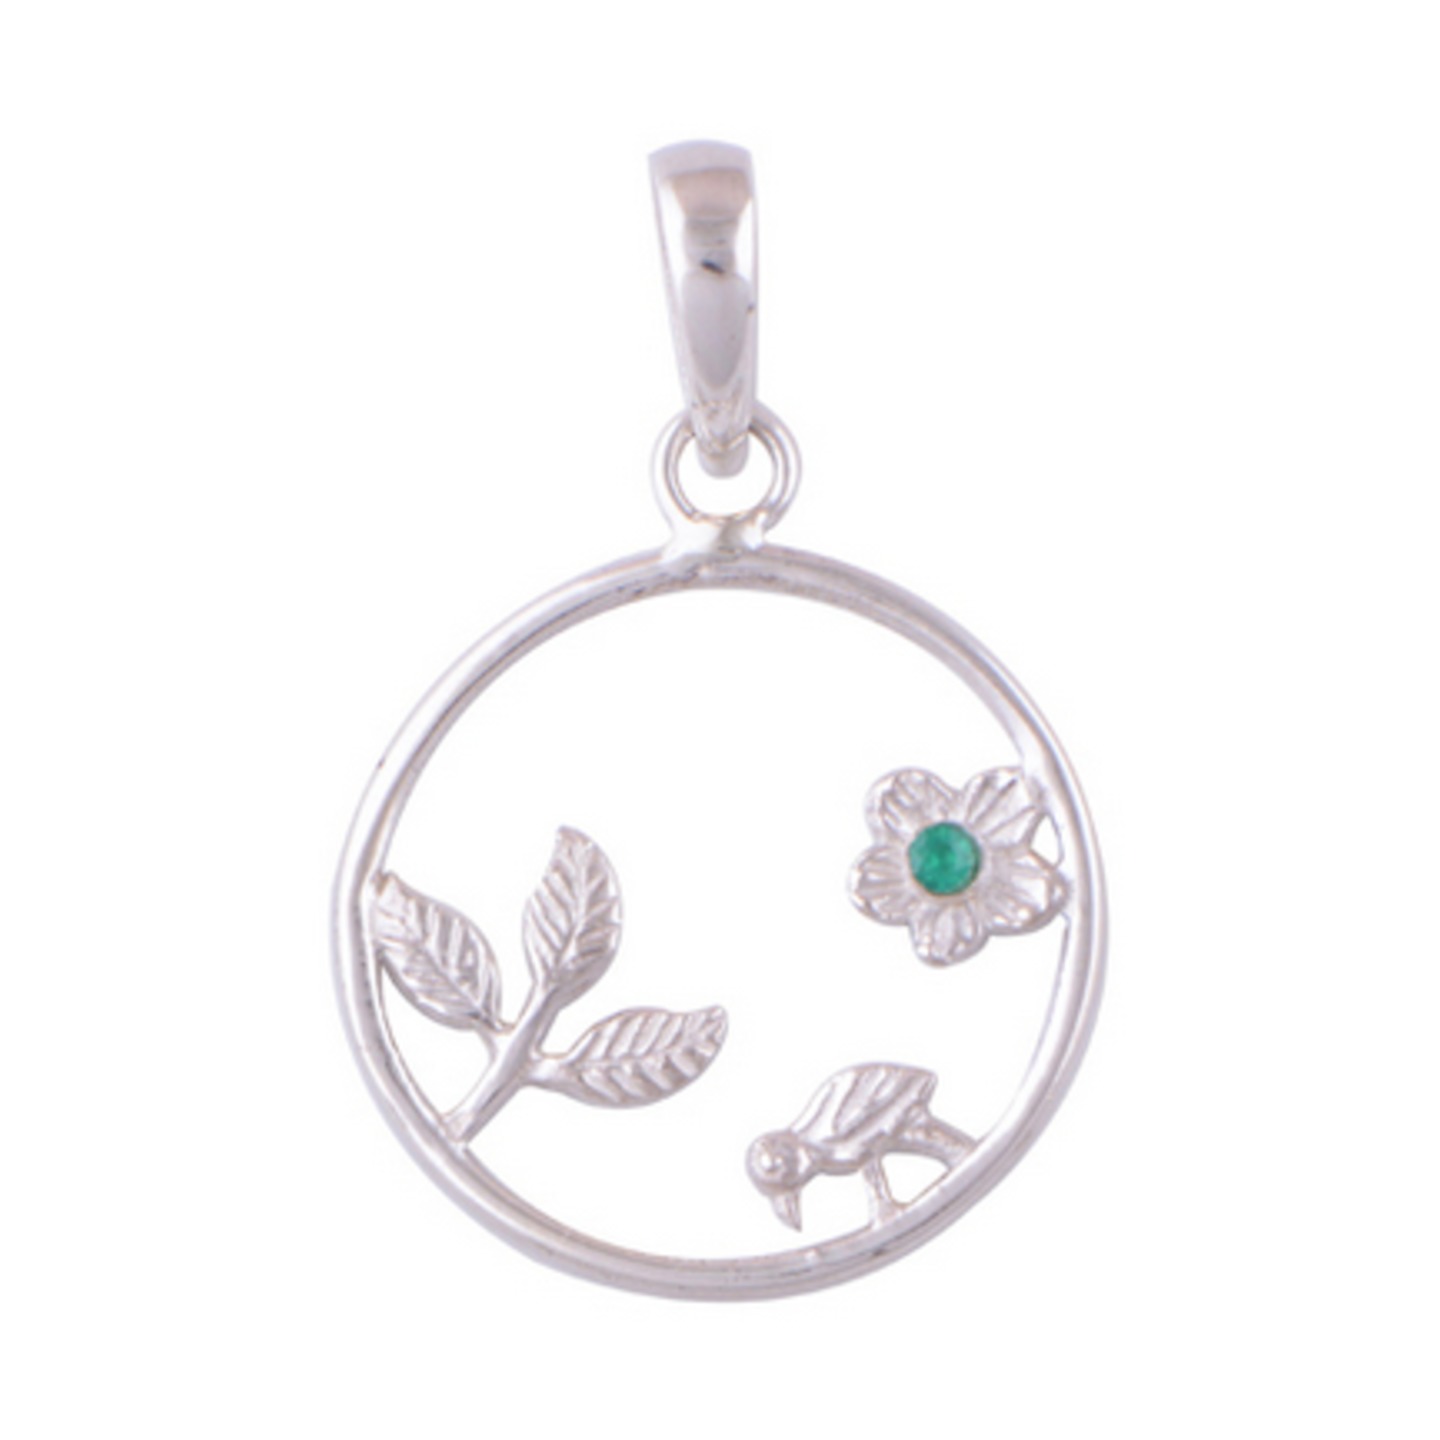 The Duckling Silver Pendant